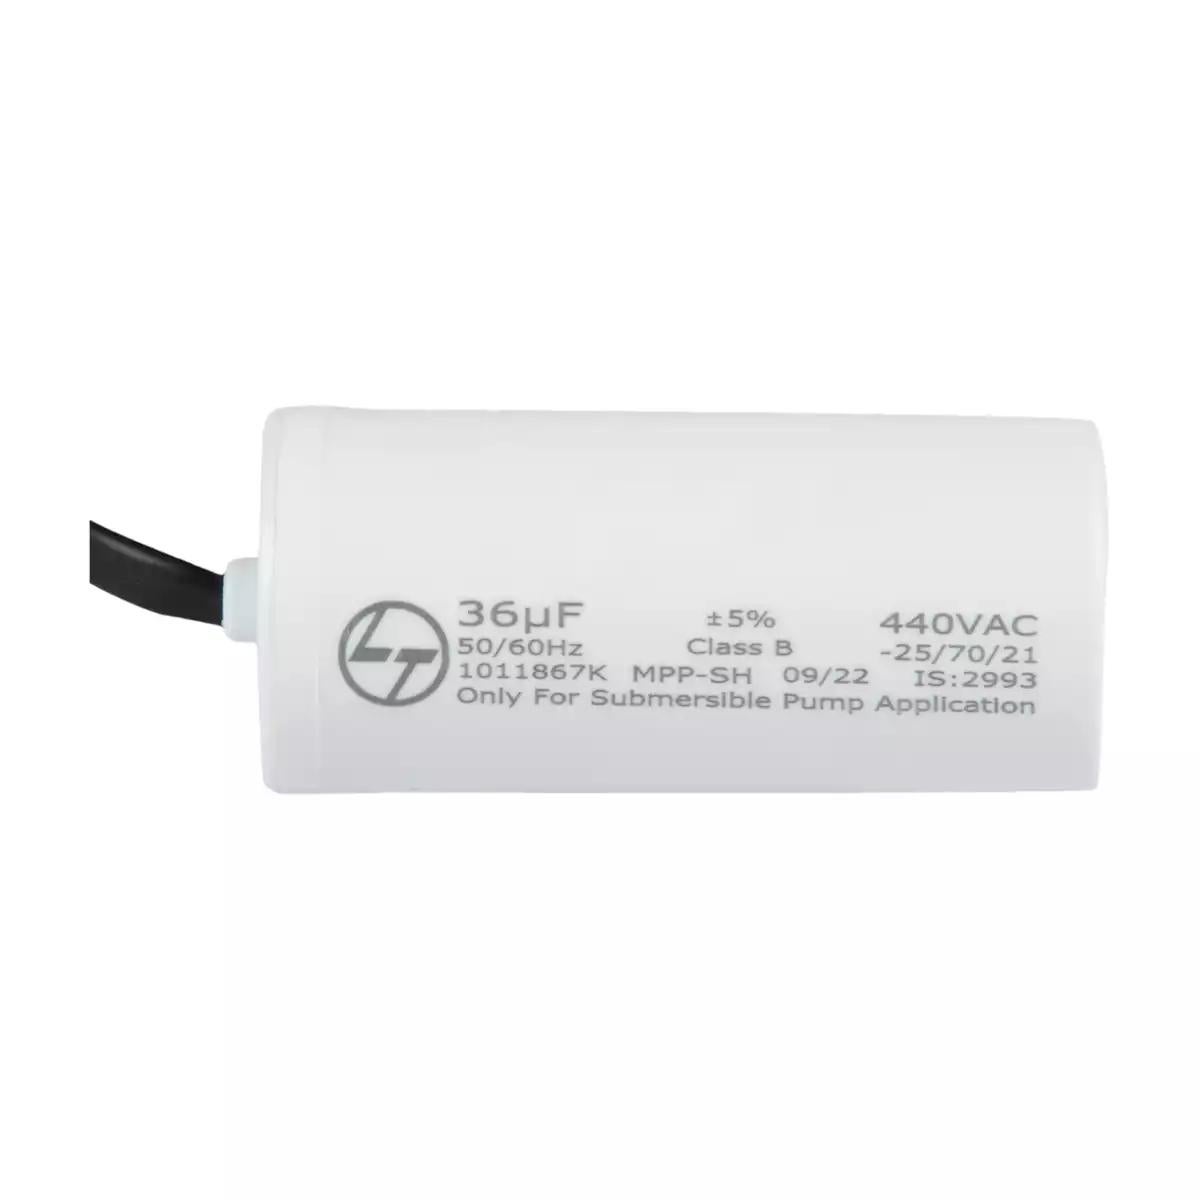 MFD Capacitor for 1ph application -MFD Capacitor with wires, Run Capacitor, 40 µF, 440V